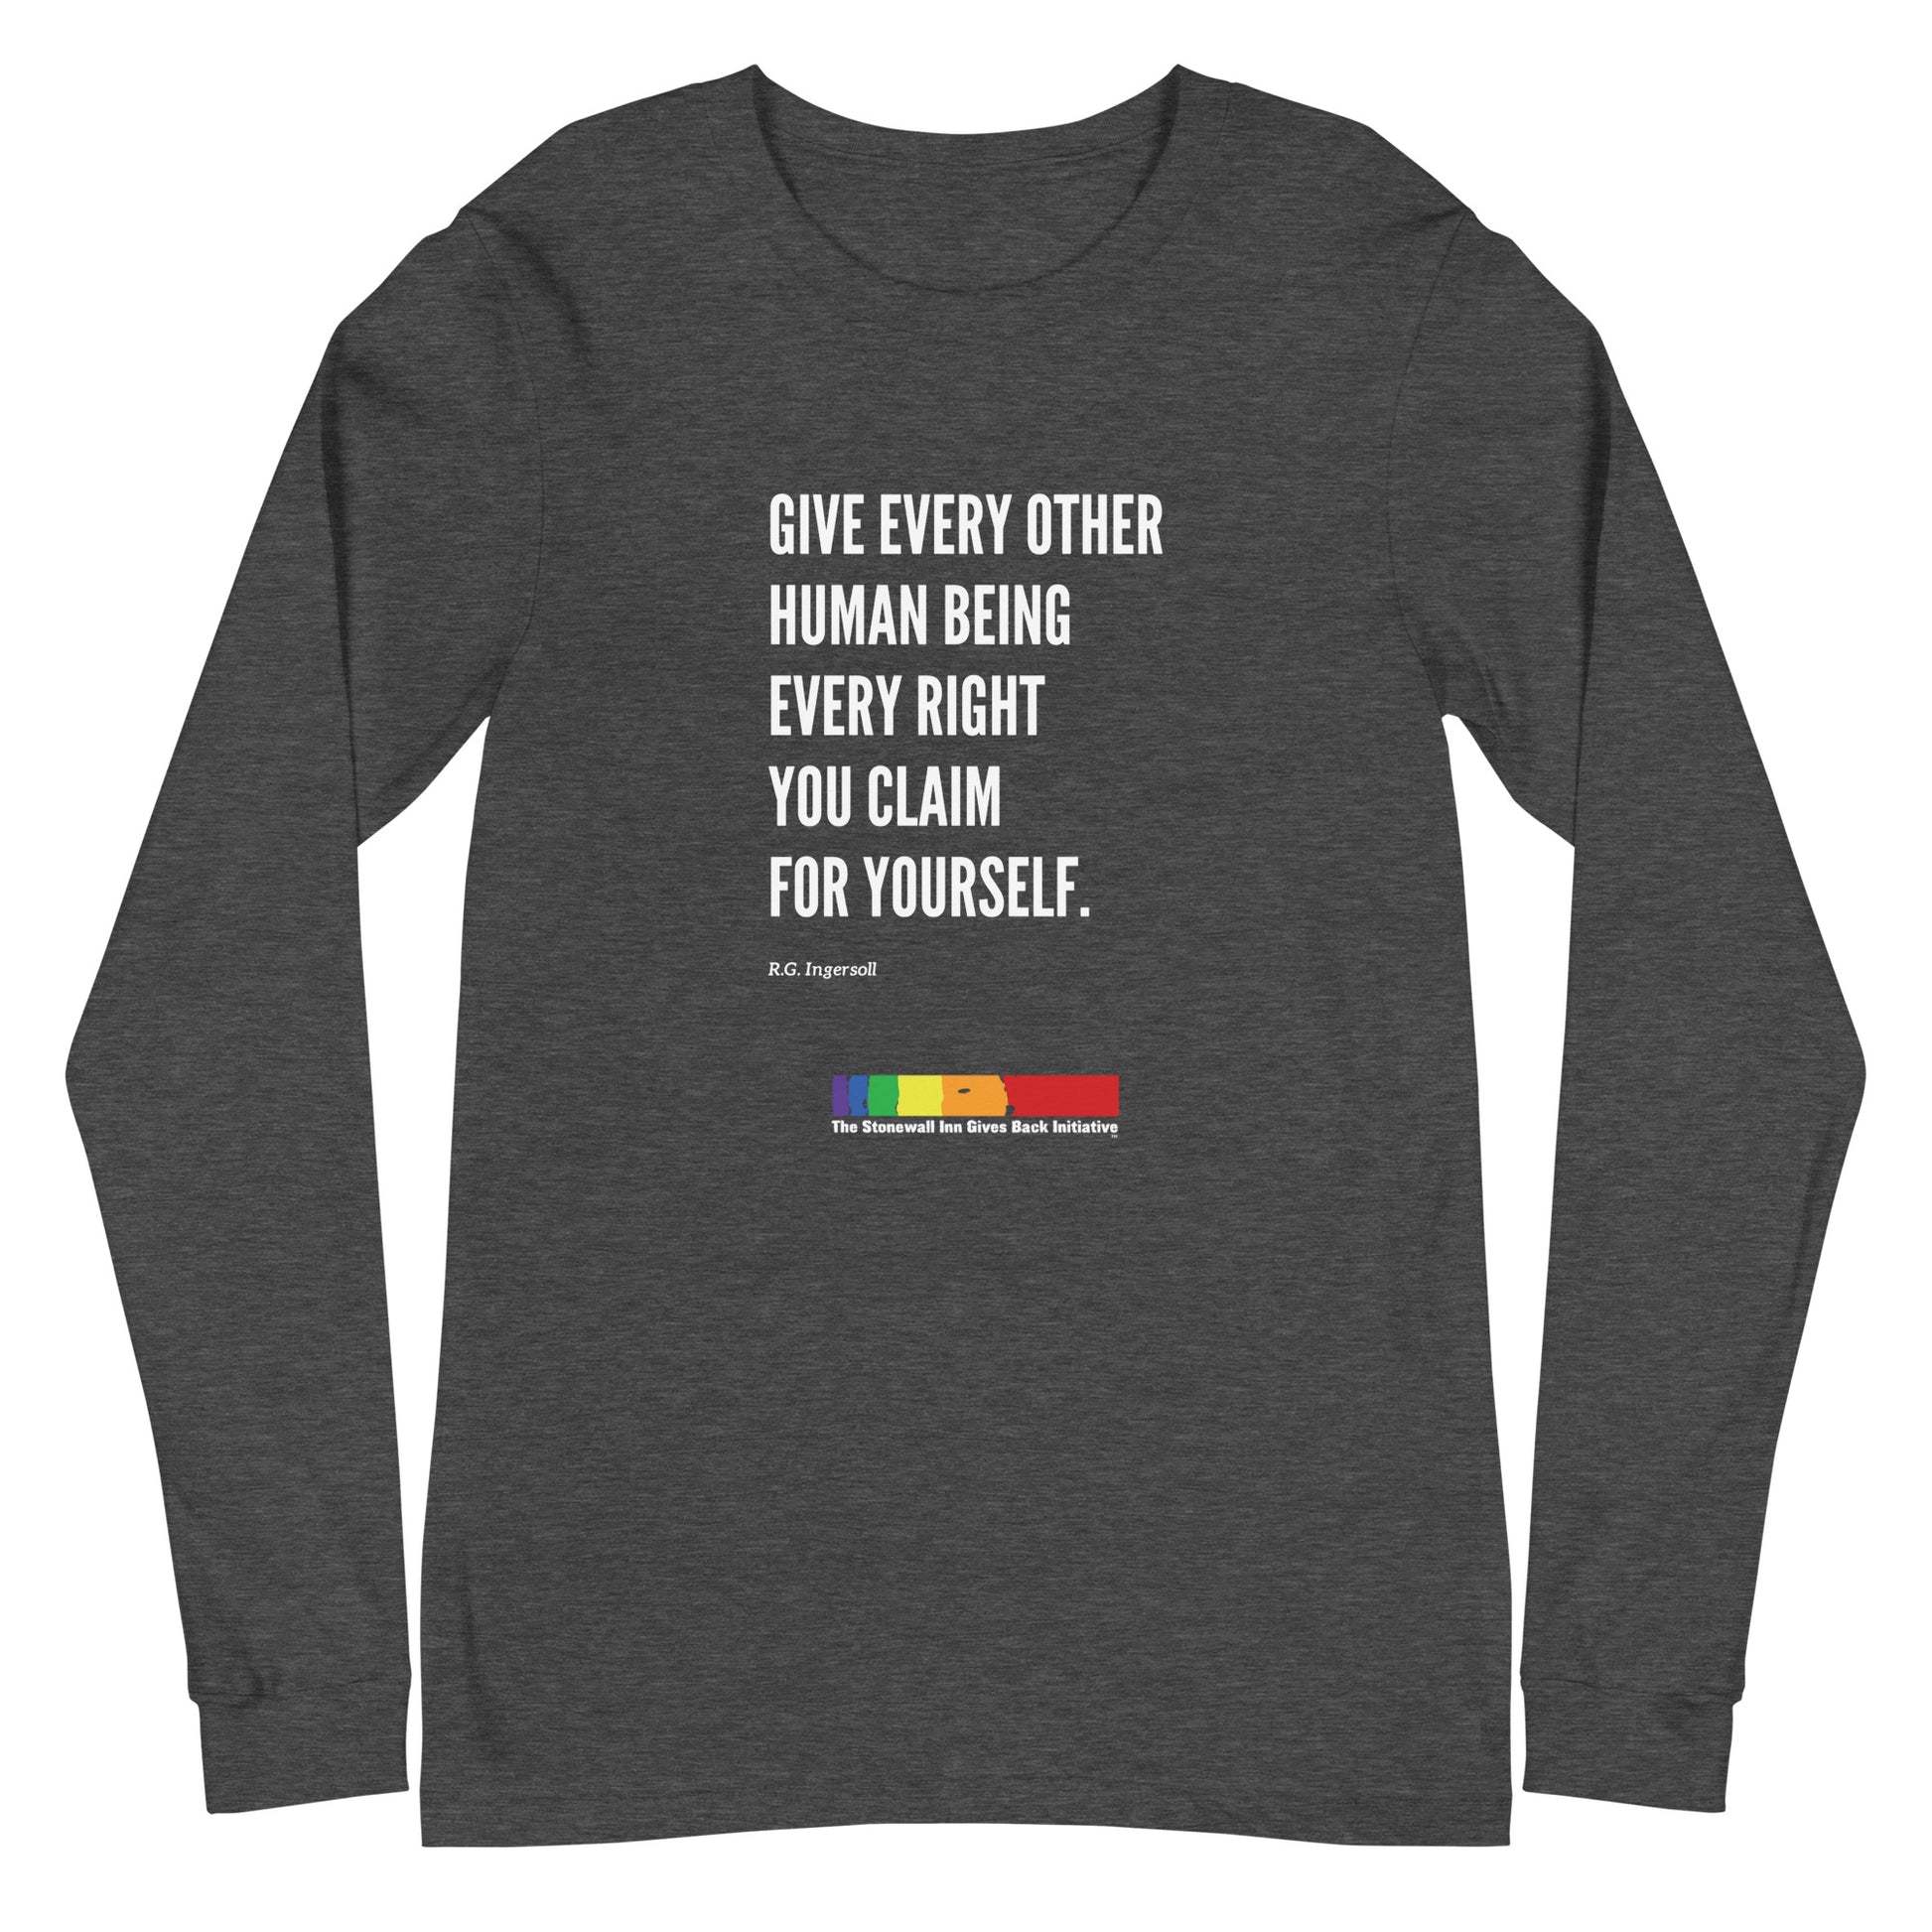 "Give Every Other Human Being Every Right You Claim For Yourself" LGBTQ+ Support long sleeve tee in Heather Grey